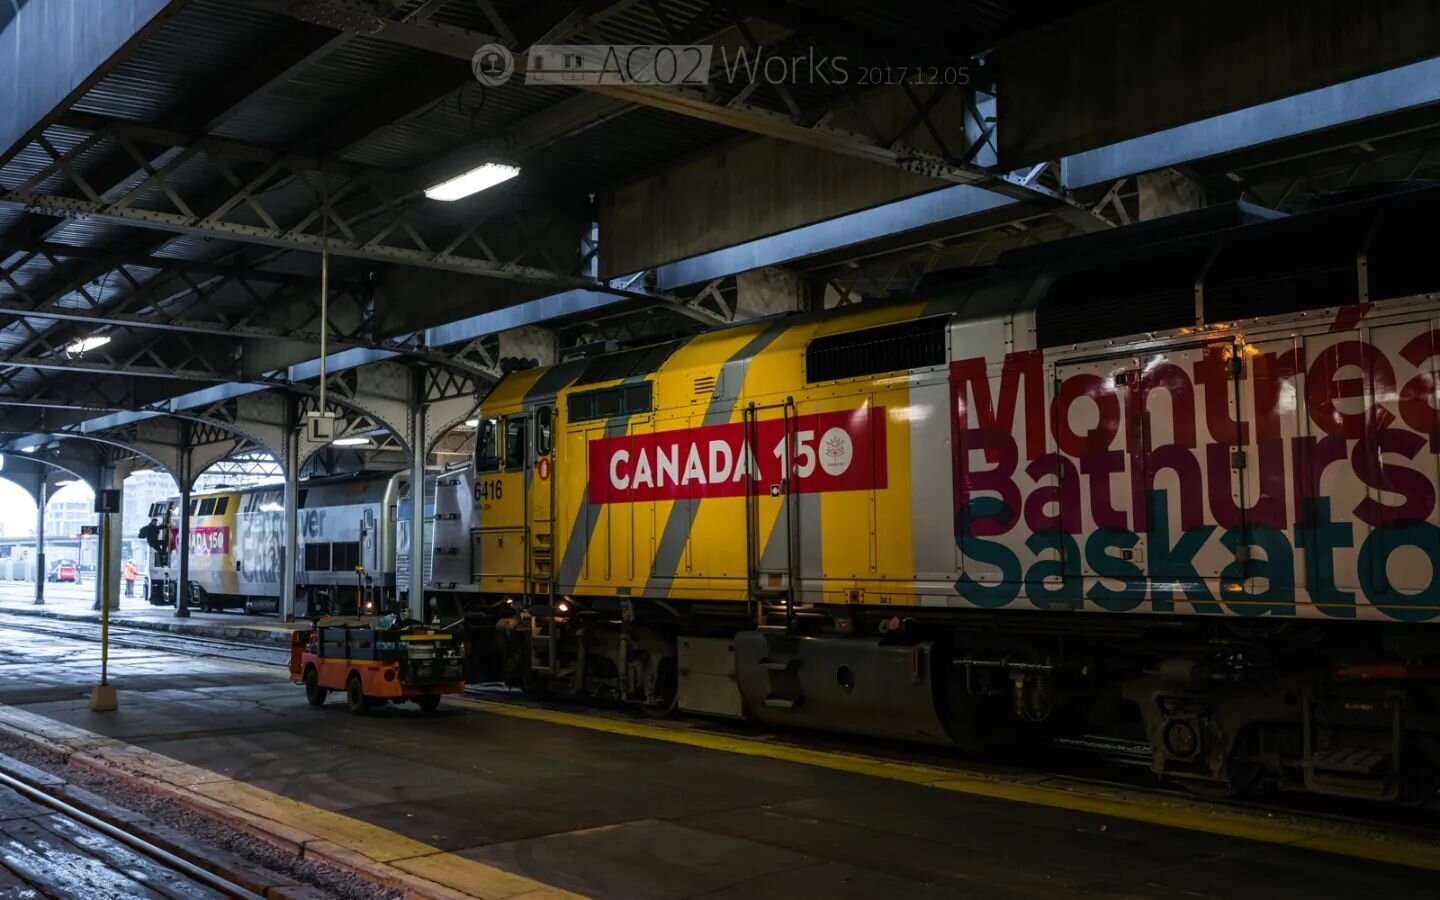 「Ready to set off」

I actually quite like these silver bananas with the 'Canada 150' stickers to be honest.

====================
Taken on 2017.12.05. #viarail #f40ph #p42dc #electromotivedivision #electromotivediesel #generalelectric #gegenesis #tra